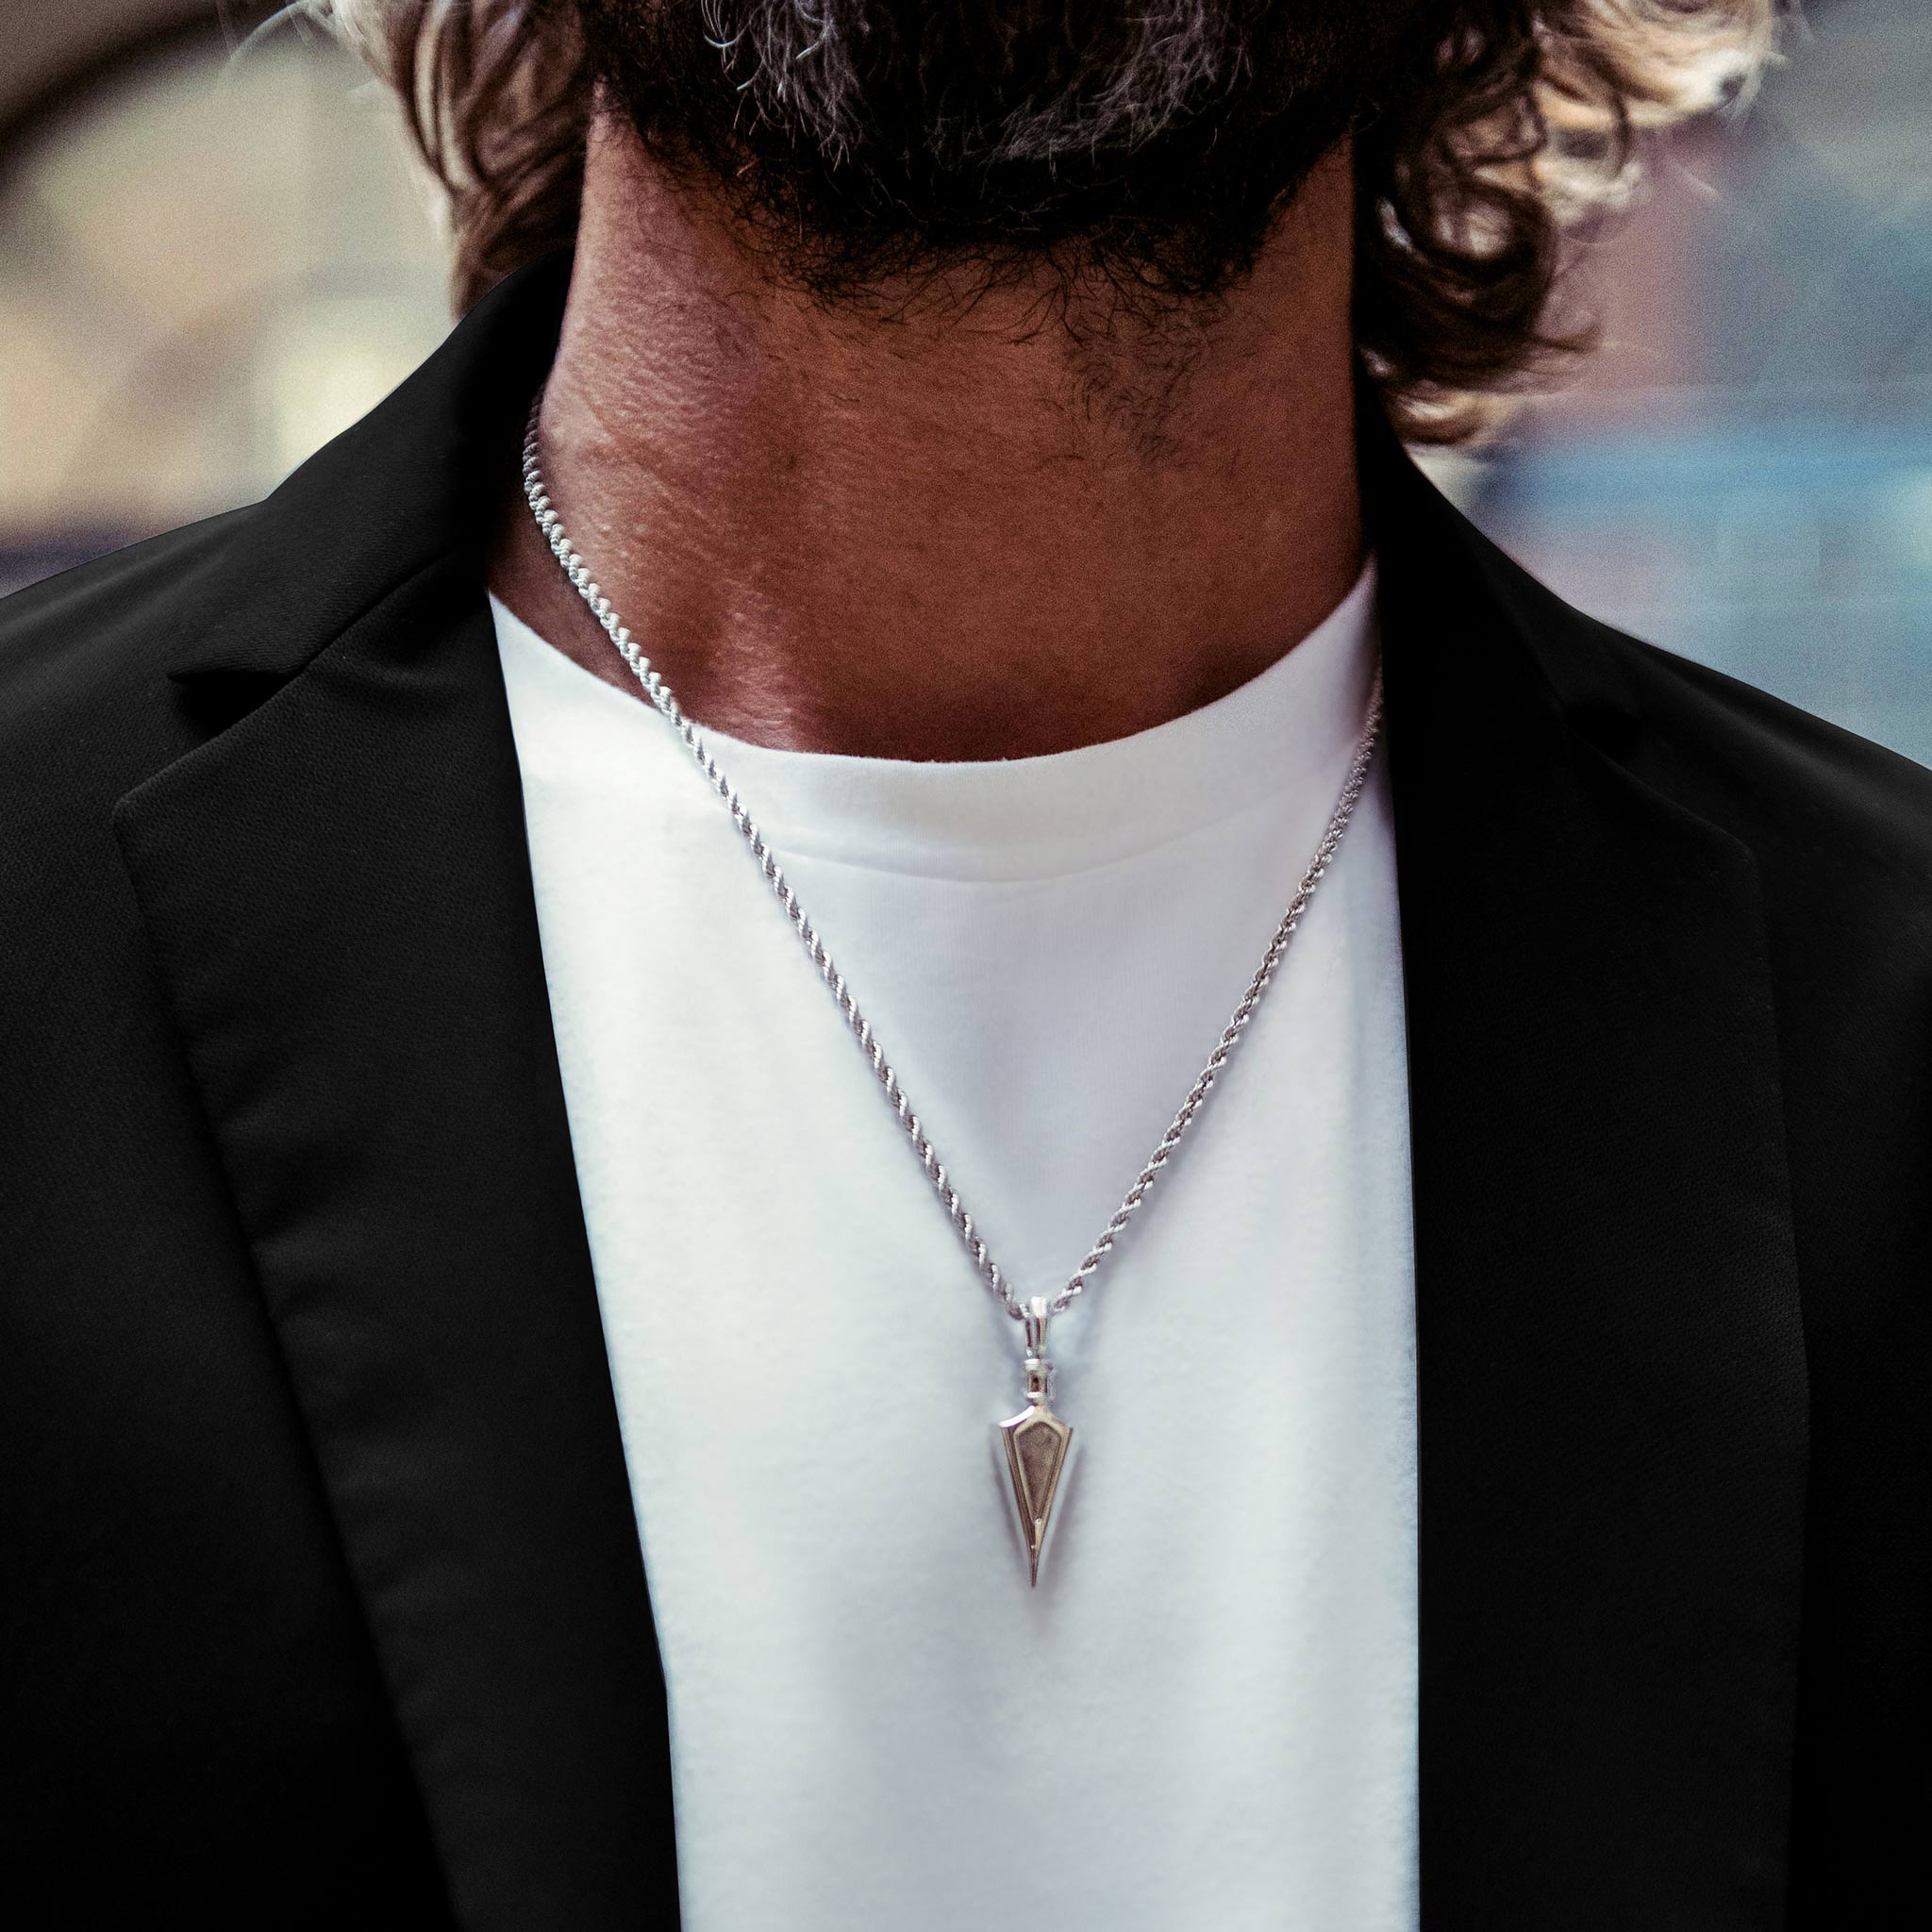 Men's Arrowhead Necklace with Meteorite Necklaces WAA FASHION GROUP 